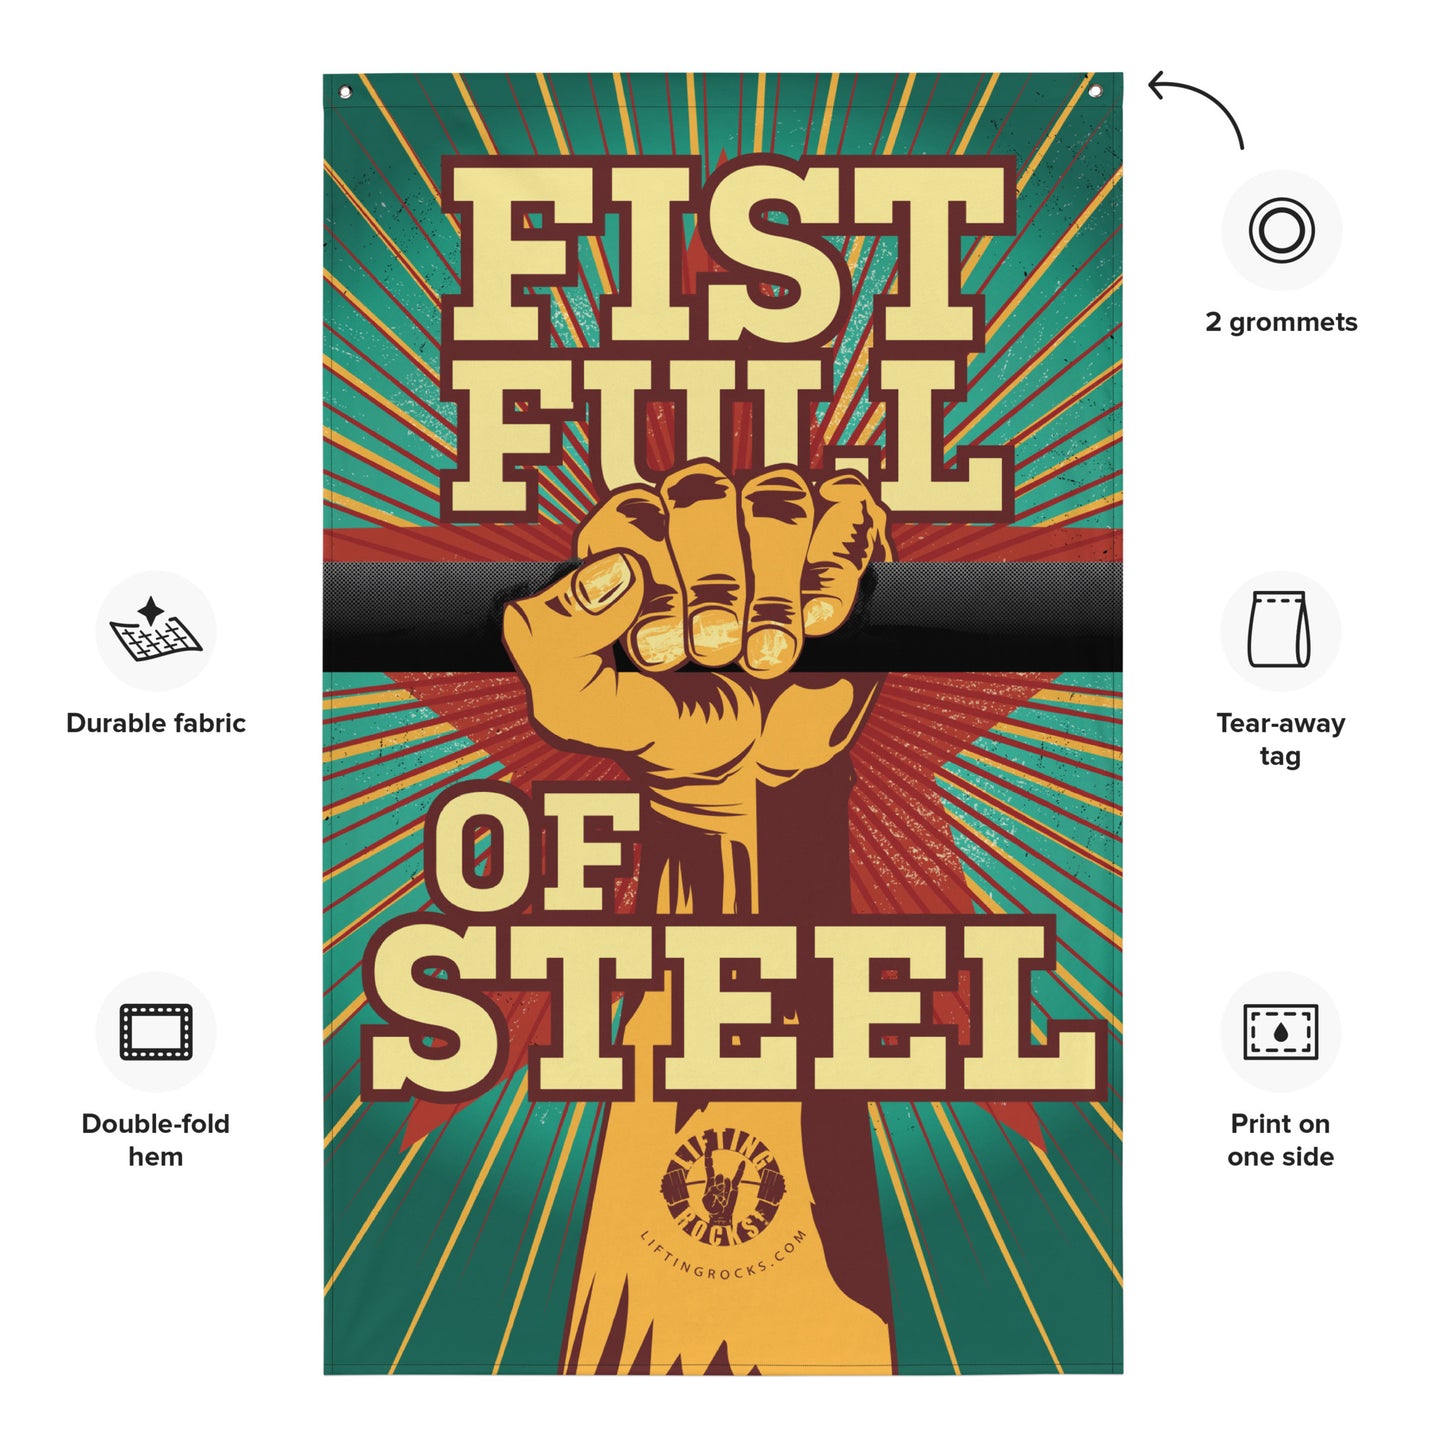 New and Updated "Fist Full of Steel" 3'x5' Gym Flag